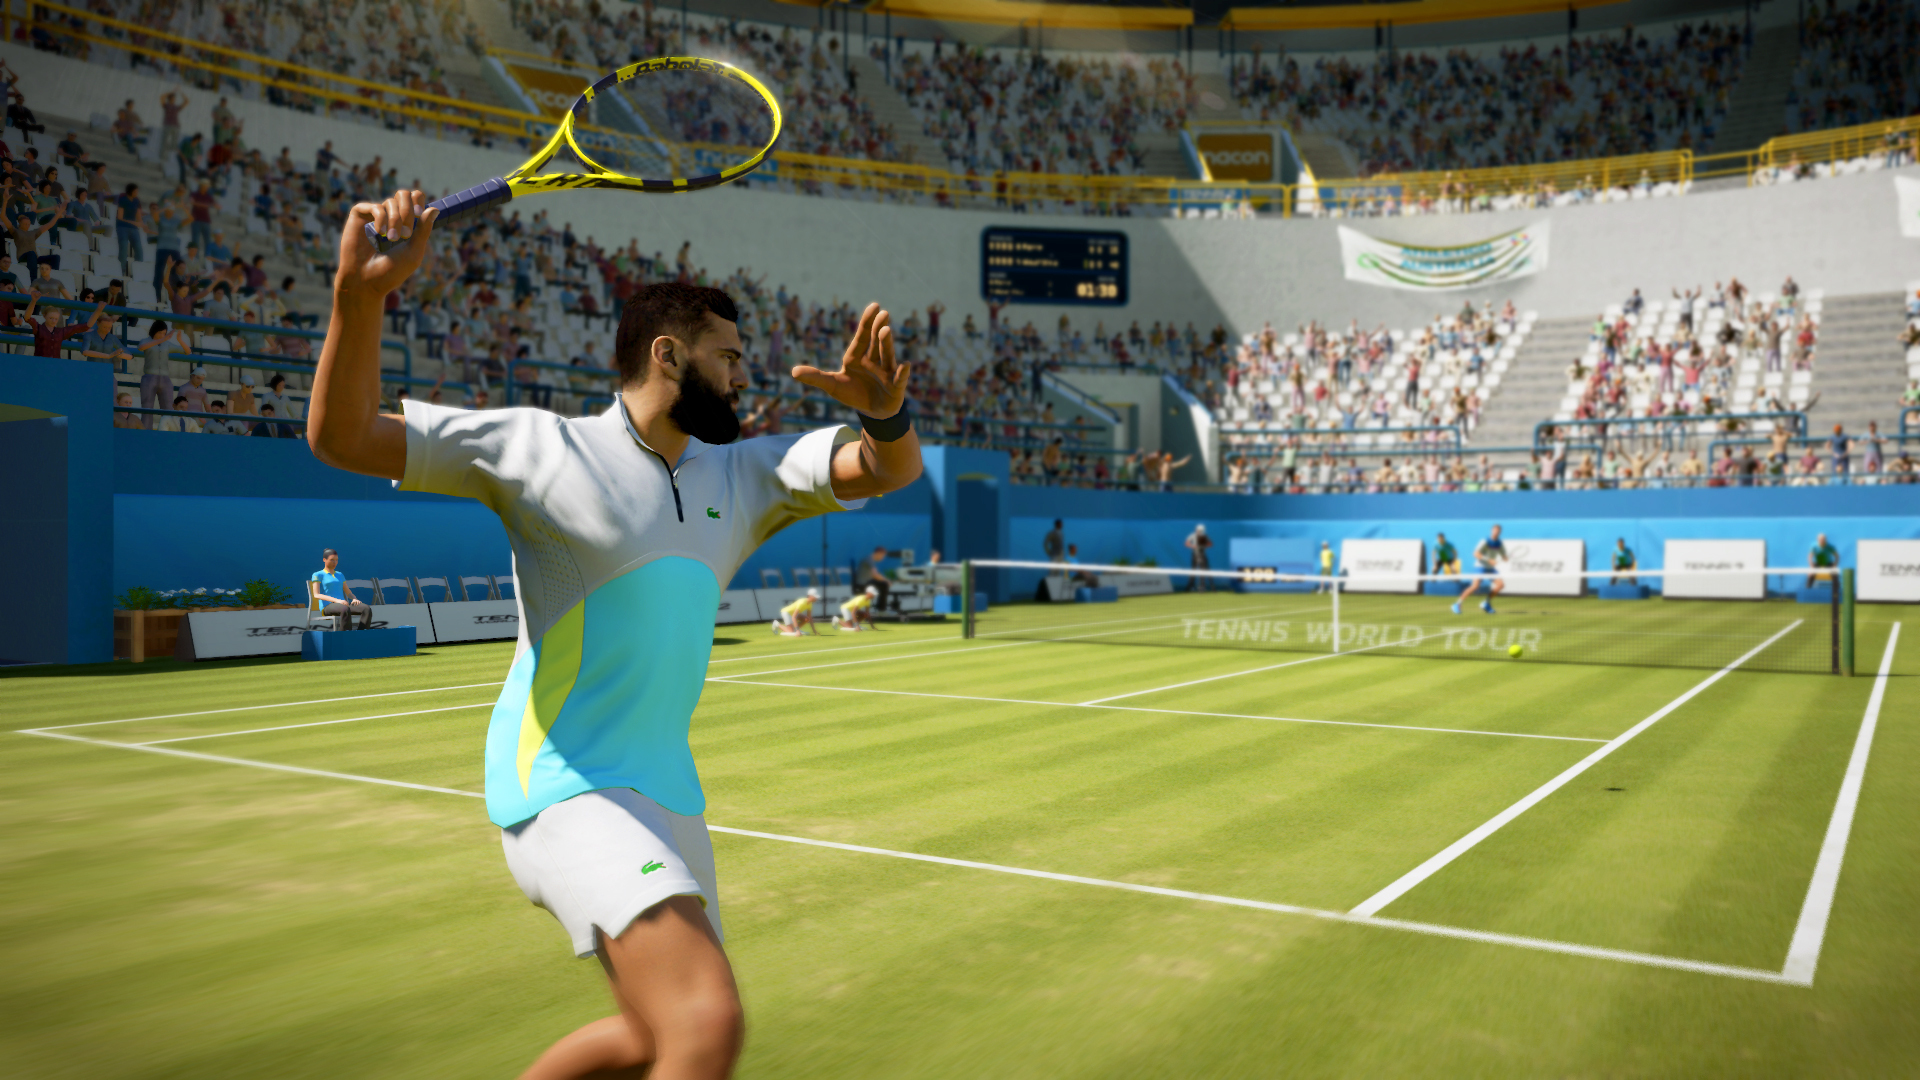 New Tennis World Tour 2 Update Patch Notes Released